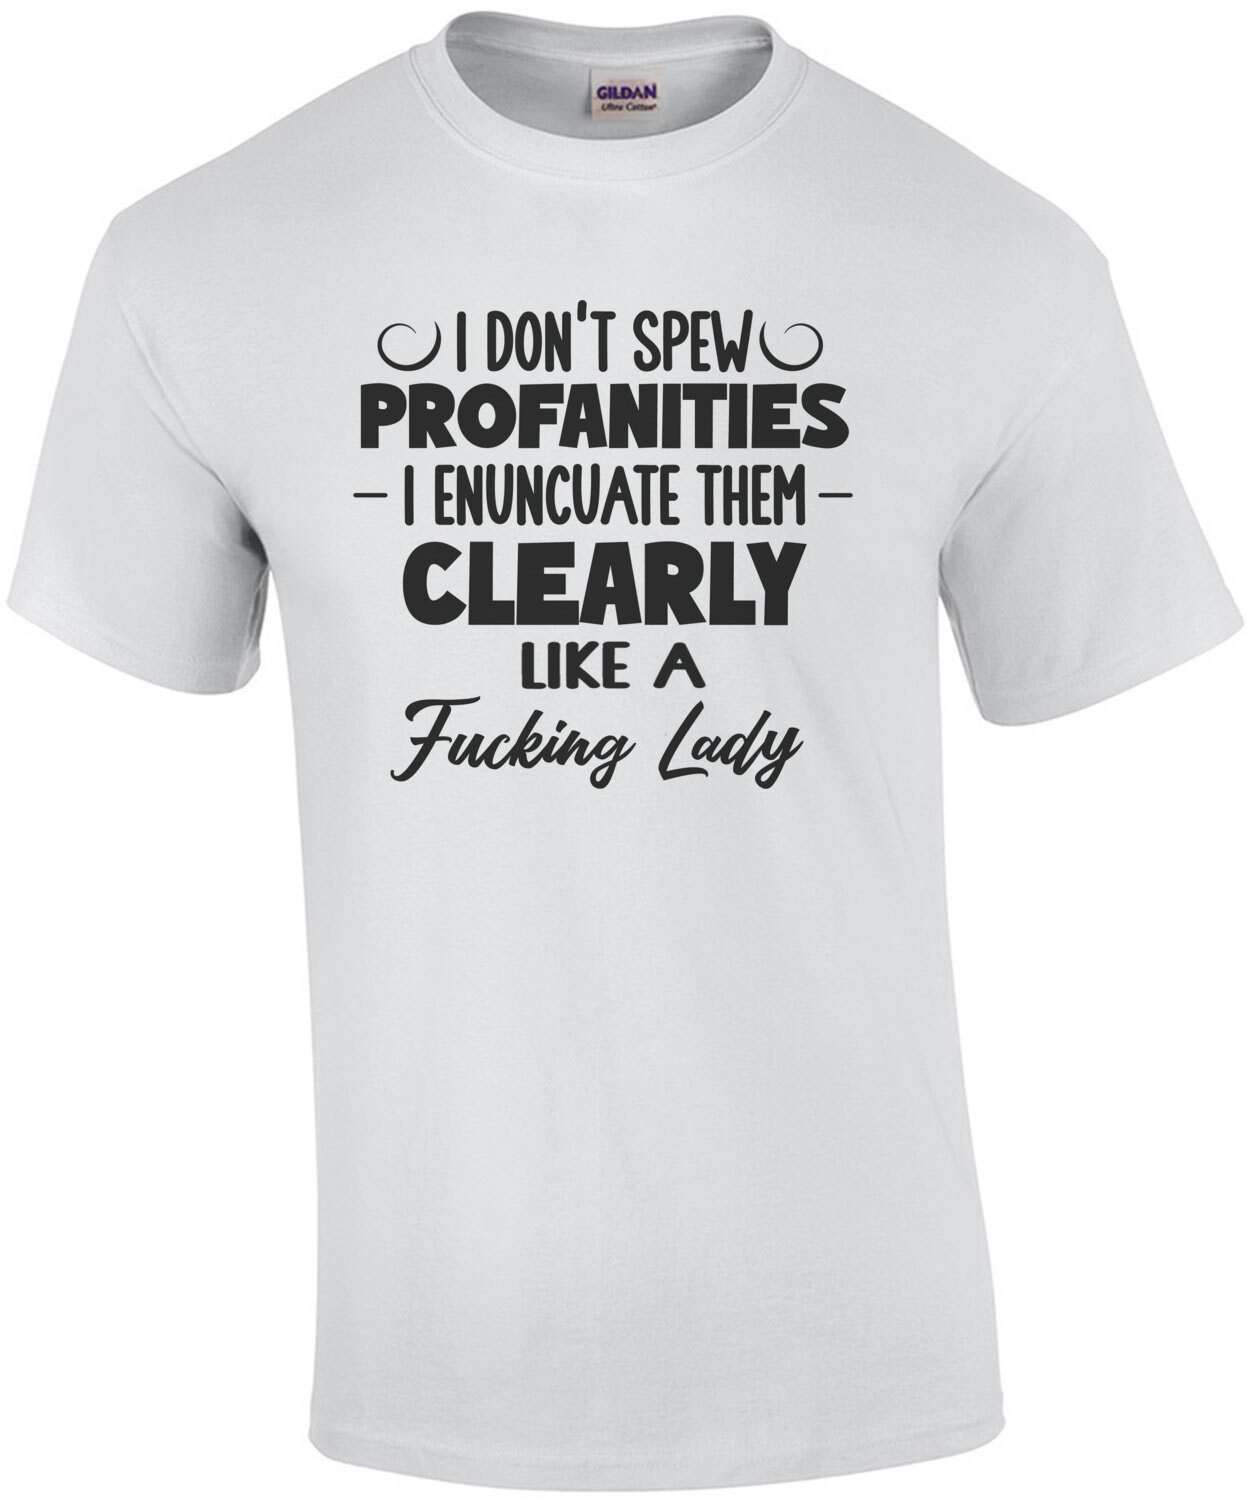 I don't spew profanities I enuncuate them clearly like a fucking lady - funny ladies t-shirt